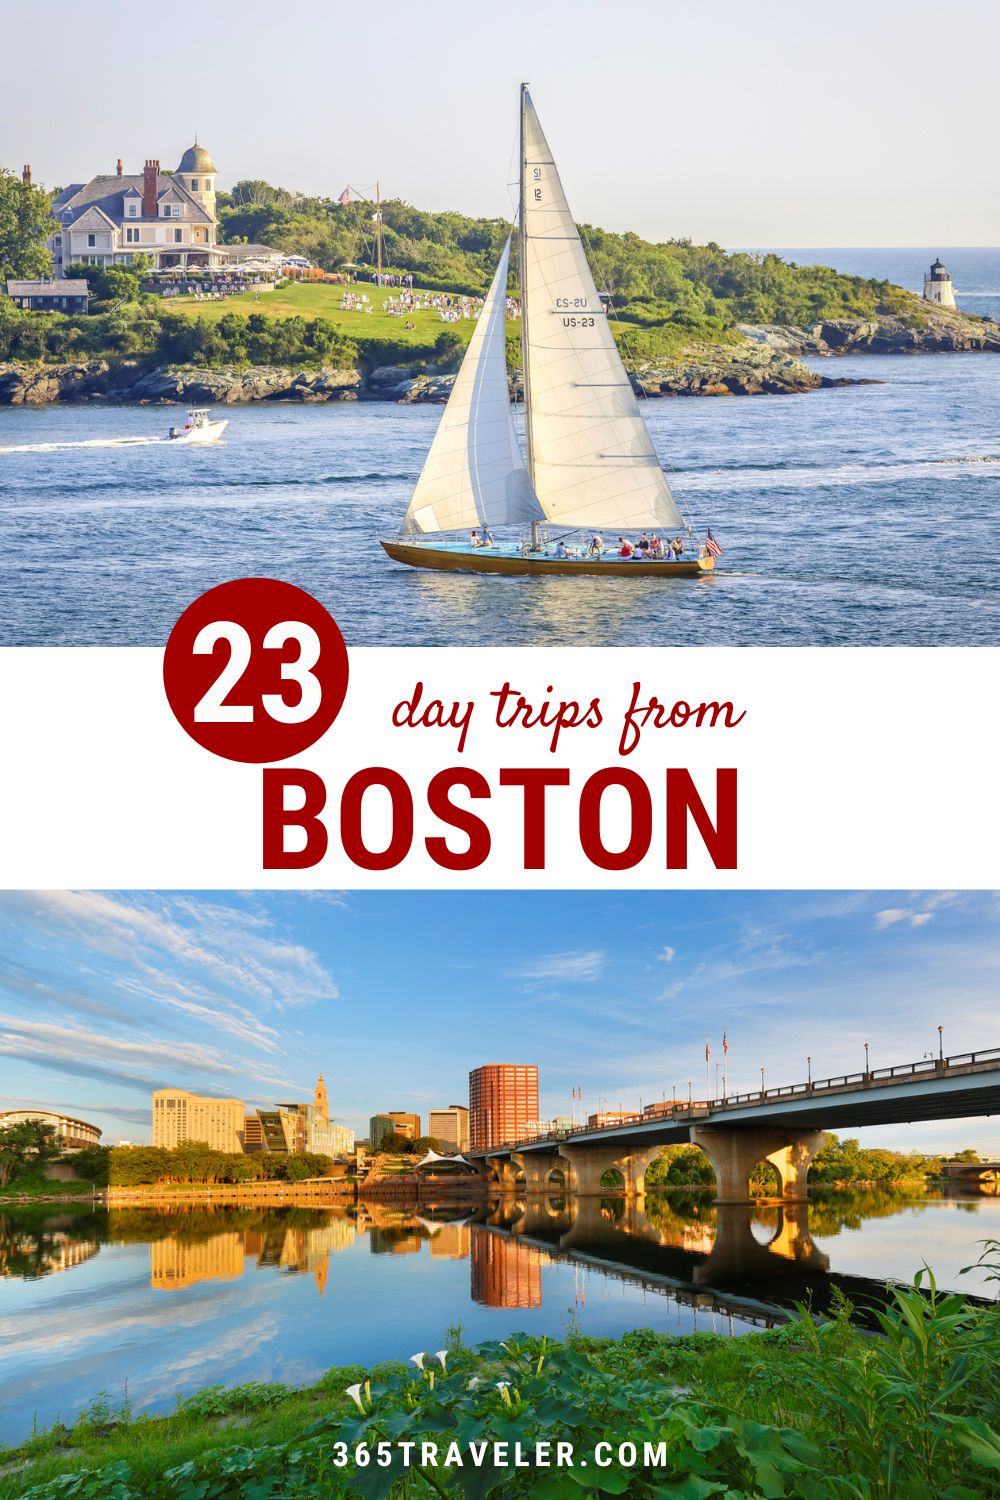 23 Best Day Trips From Boston You’ve Got To Take